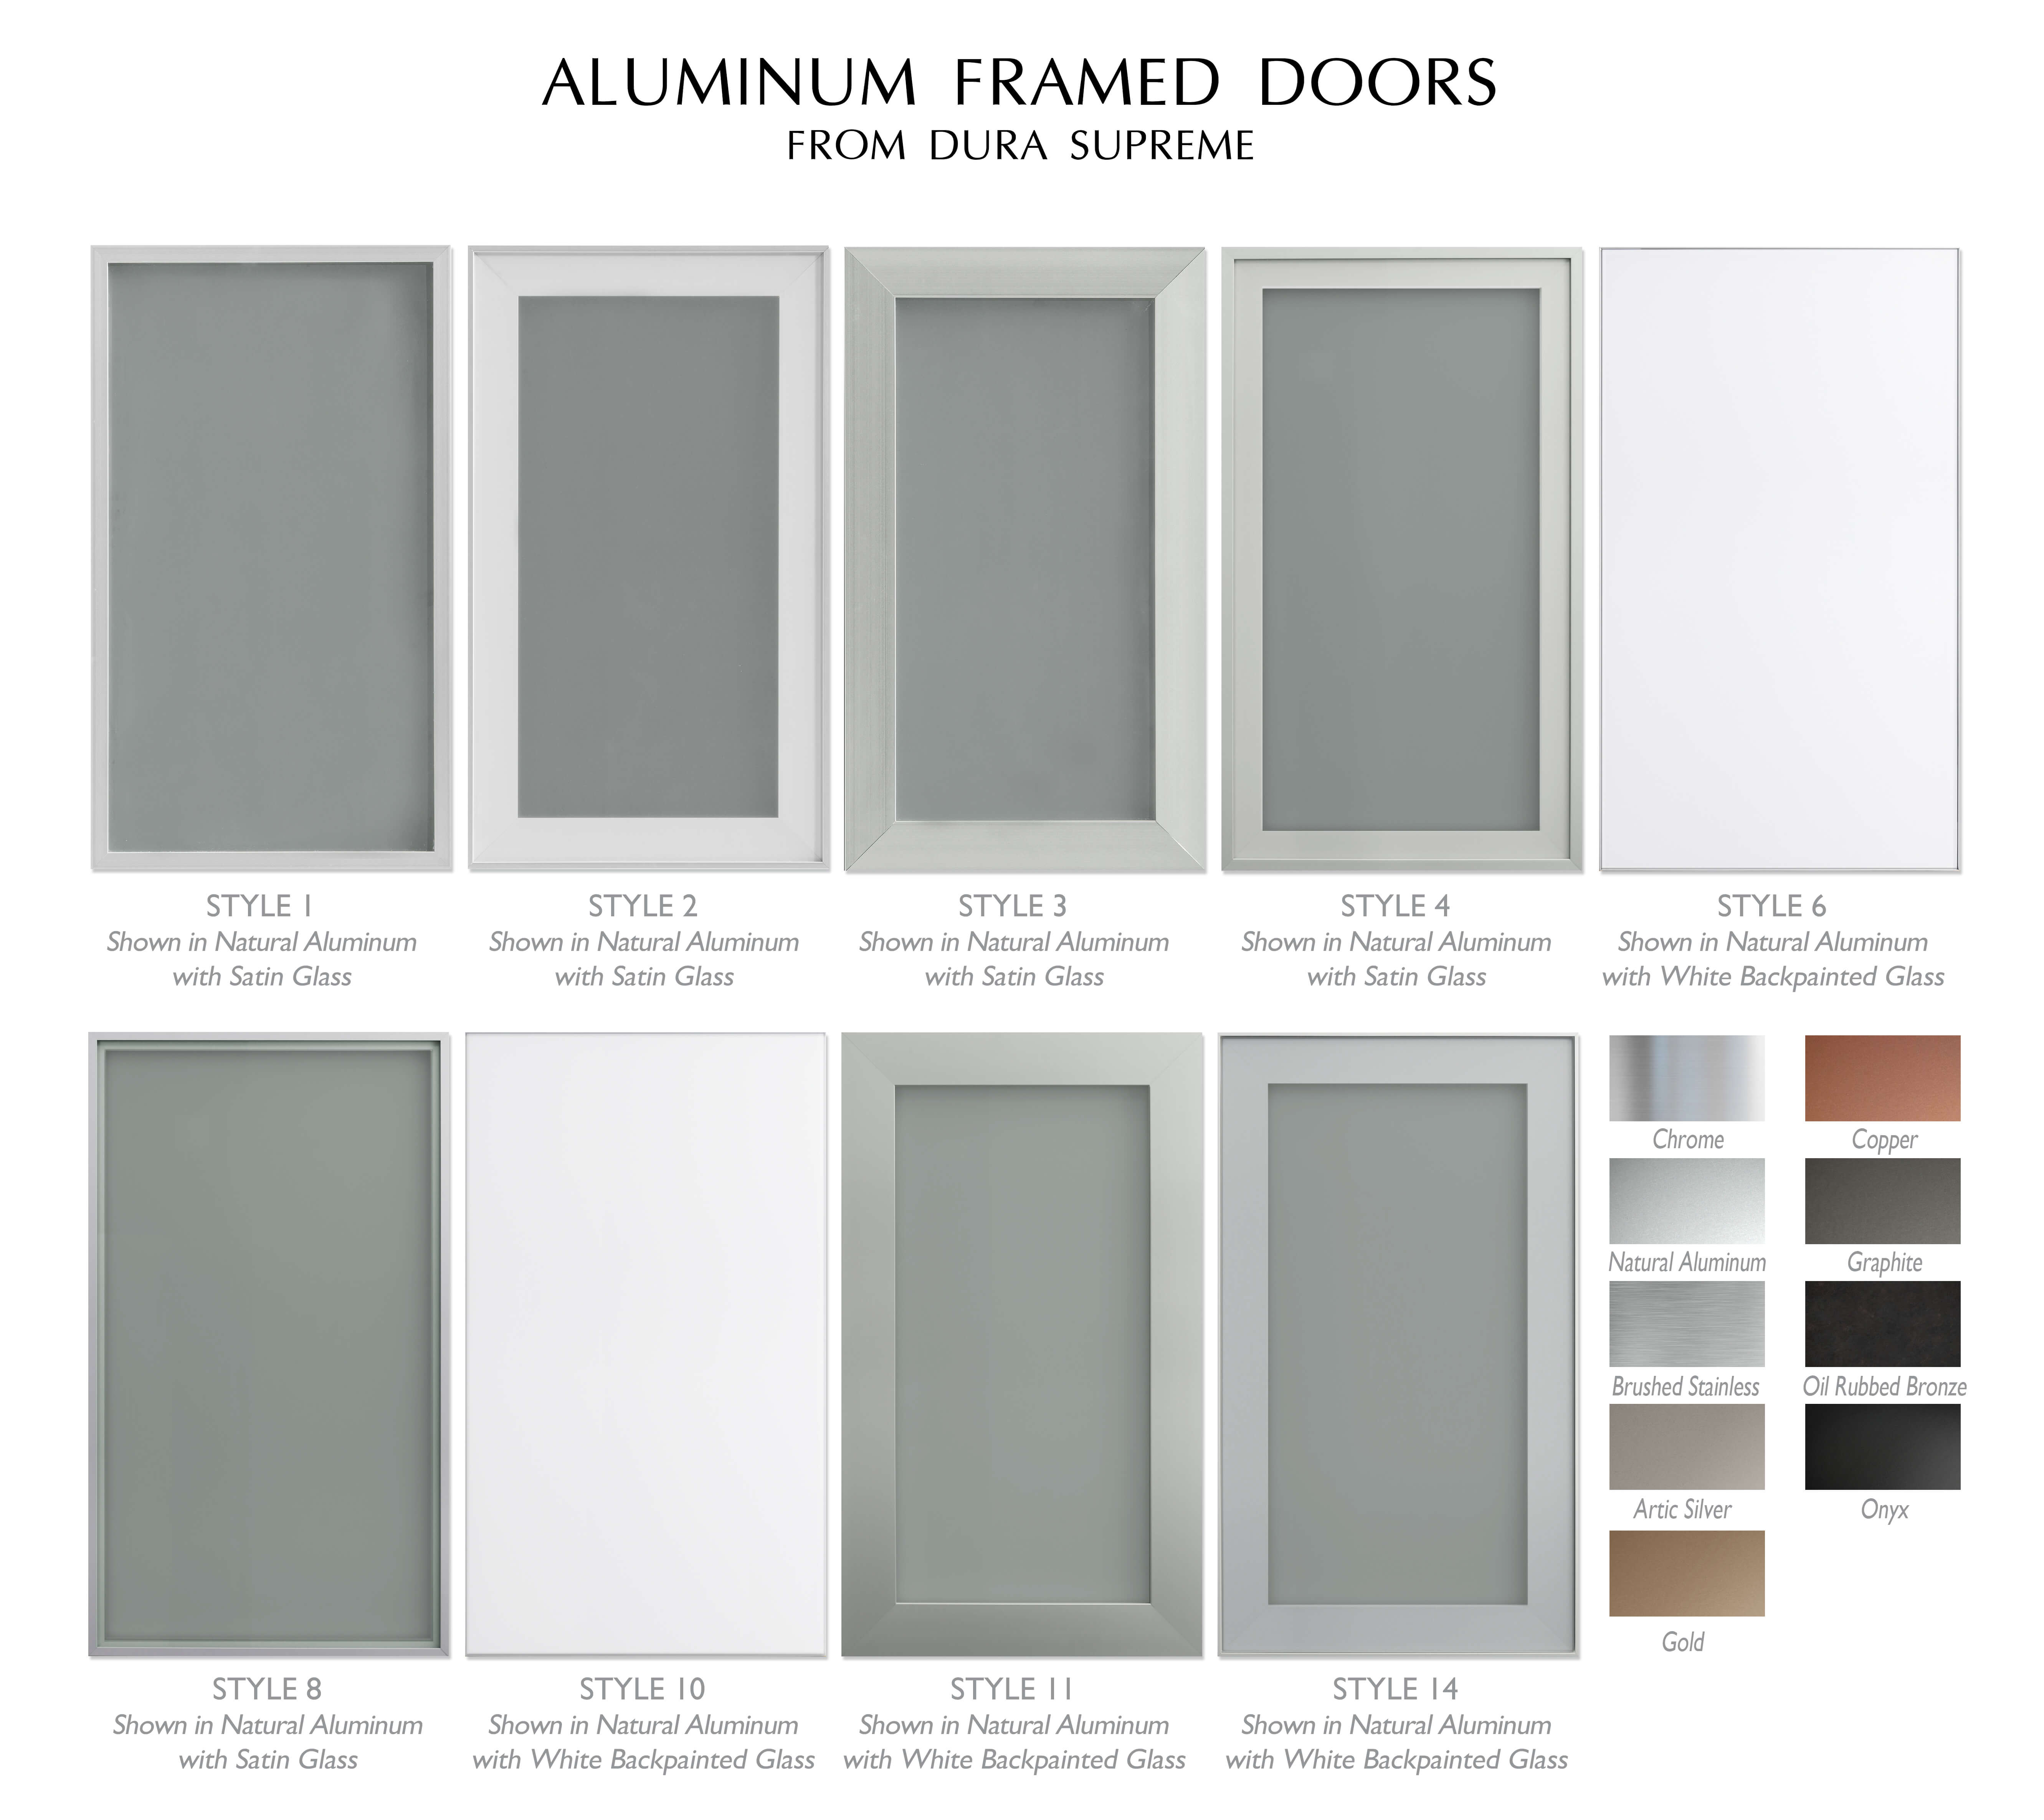 Dura Supreme Cabinetry Aluminum Framed Cabinet doors showing the collection of door style options and metal finish colors.